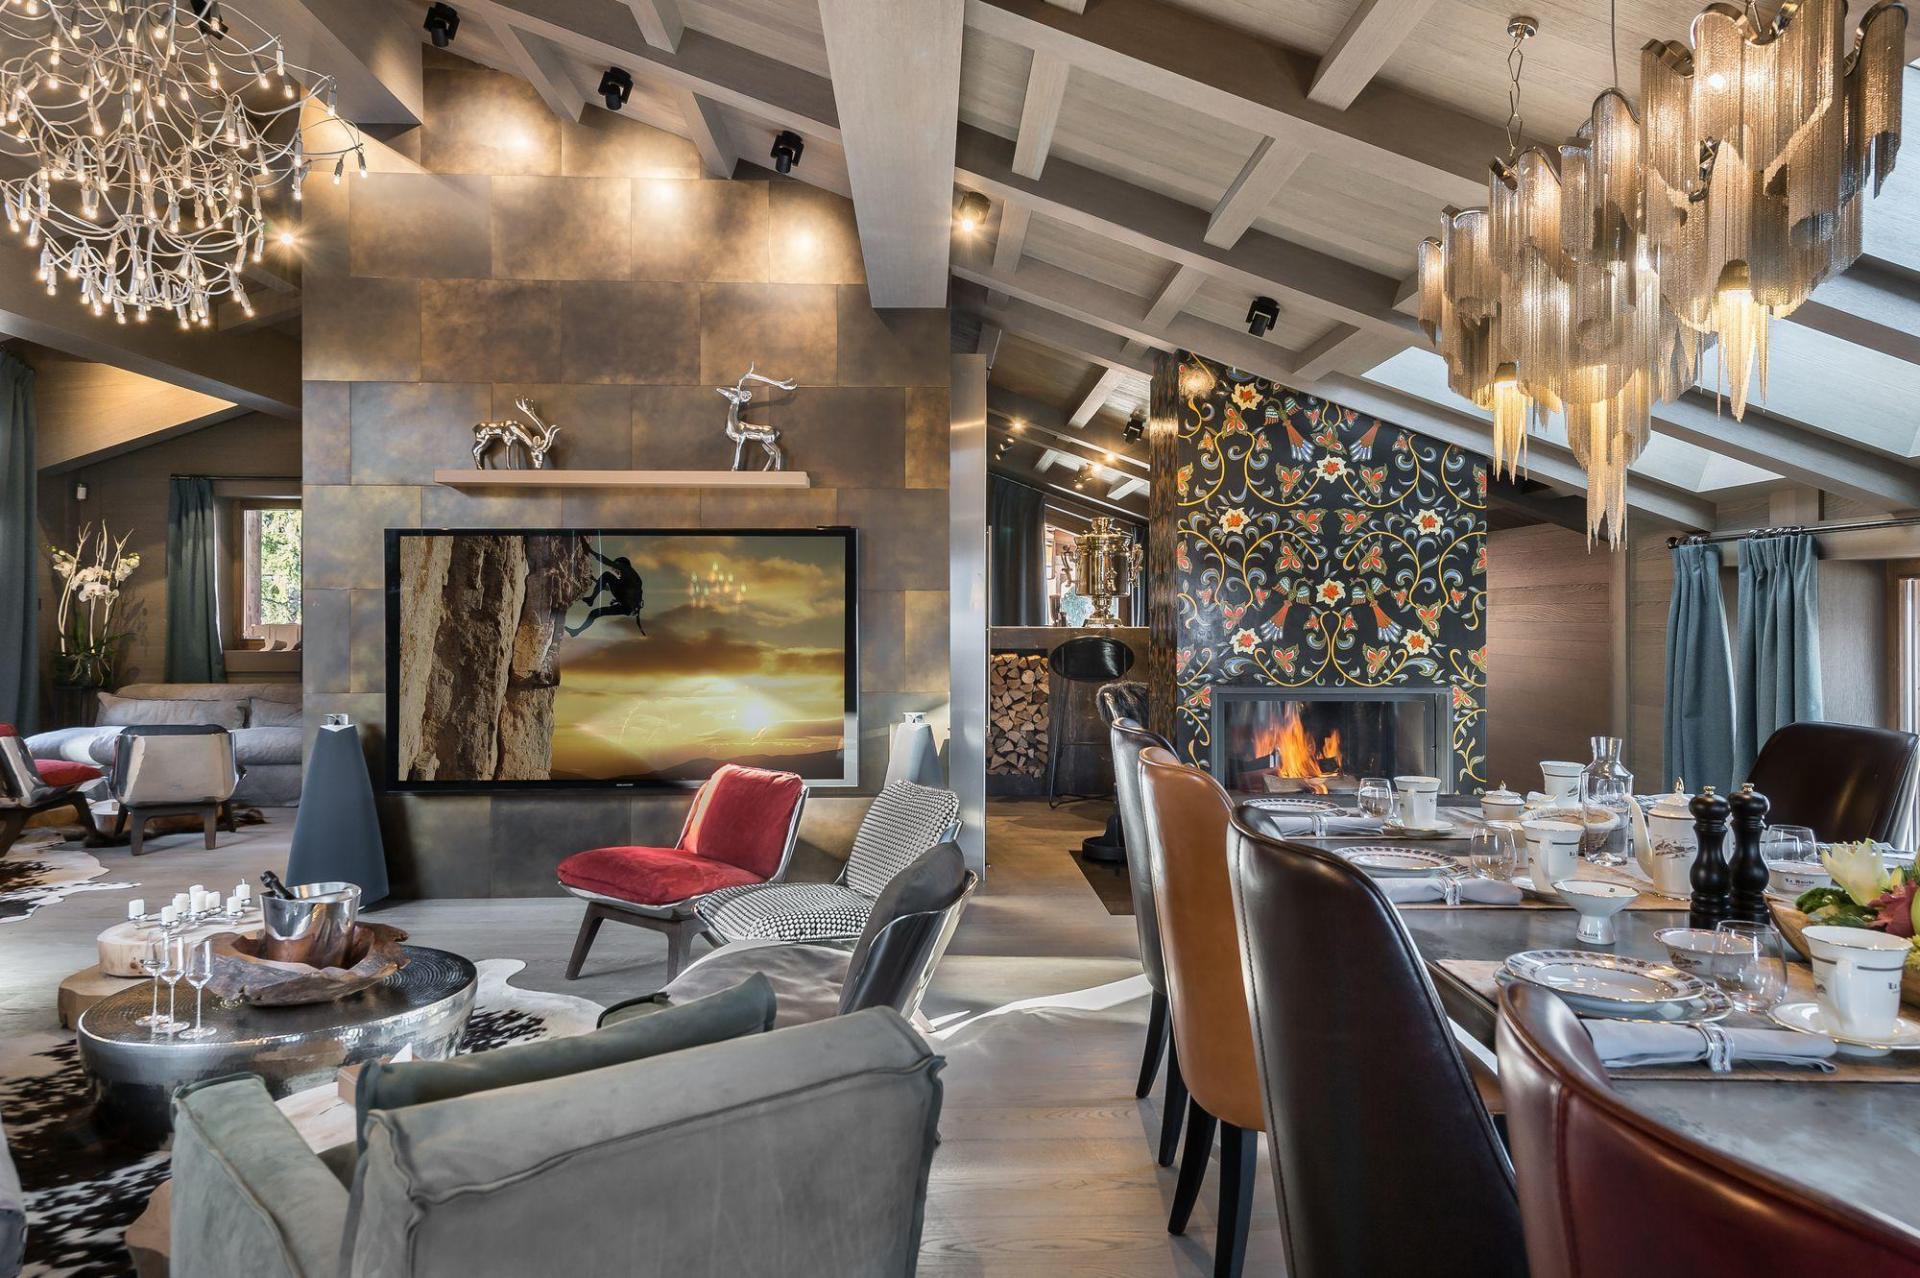 A LUXURY CHALET RENTAL IN COURCHEVEL FOR AN UNFORGETTABLE SKI HOLIDAY